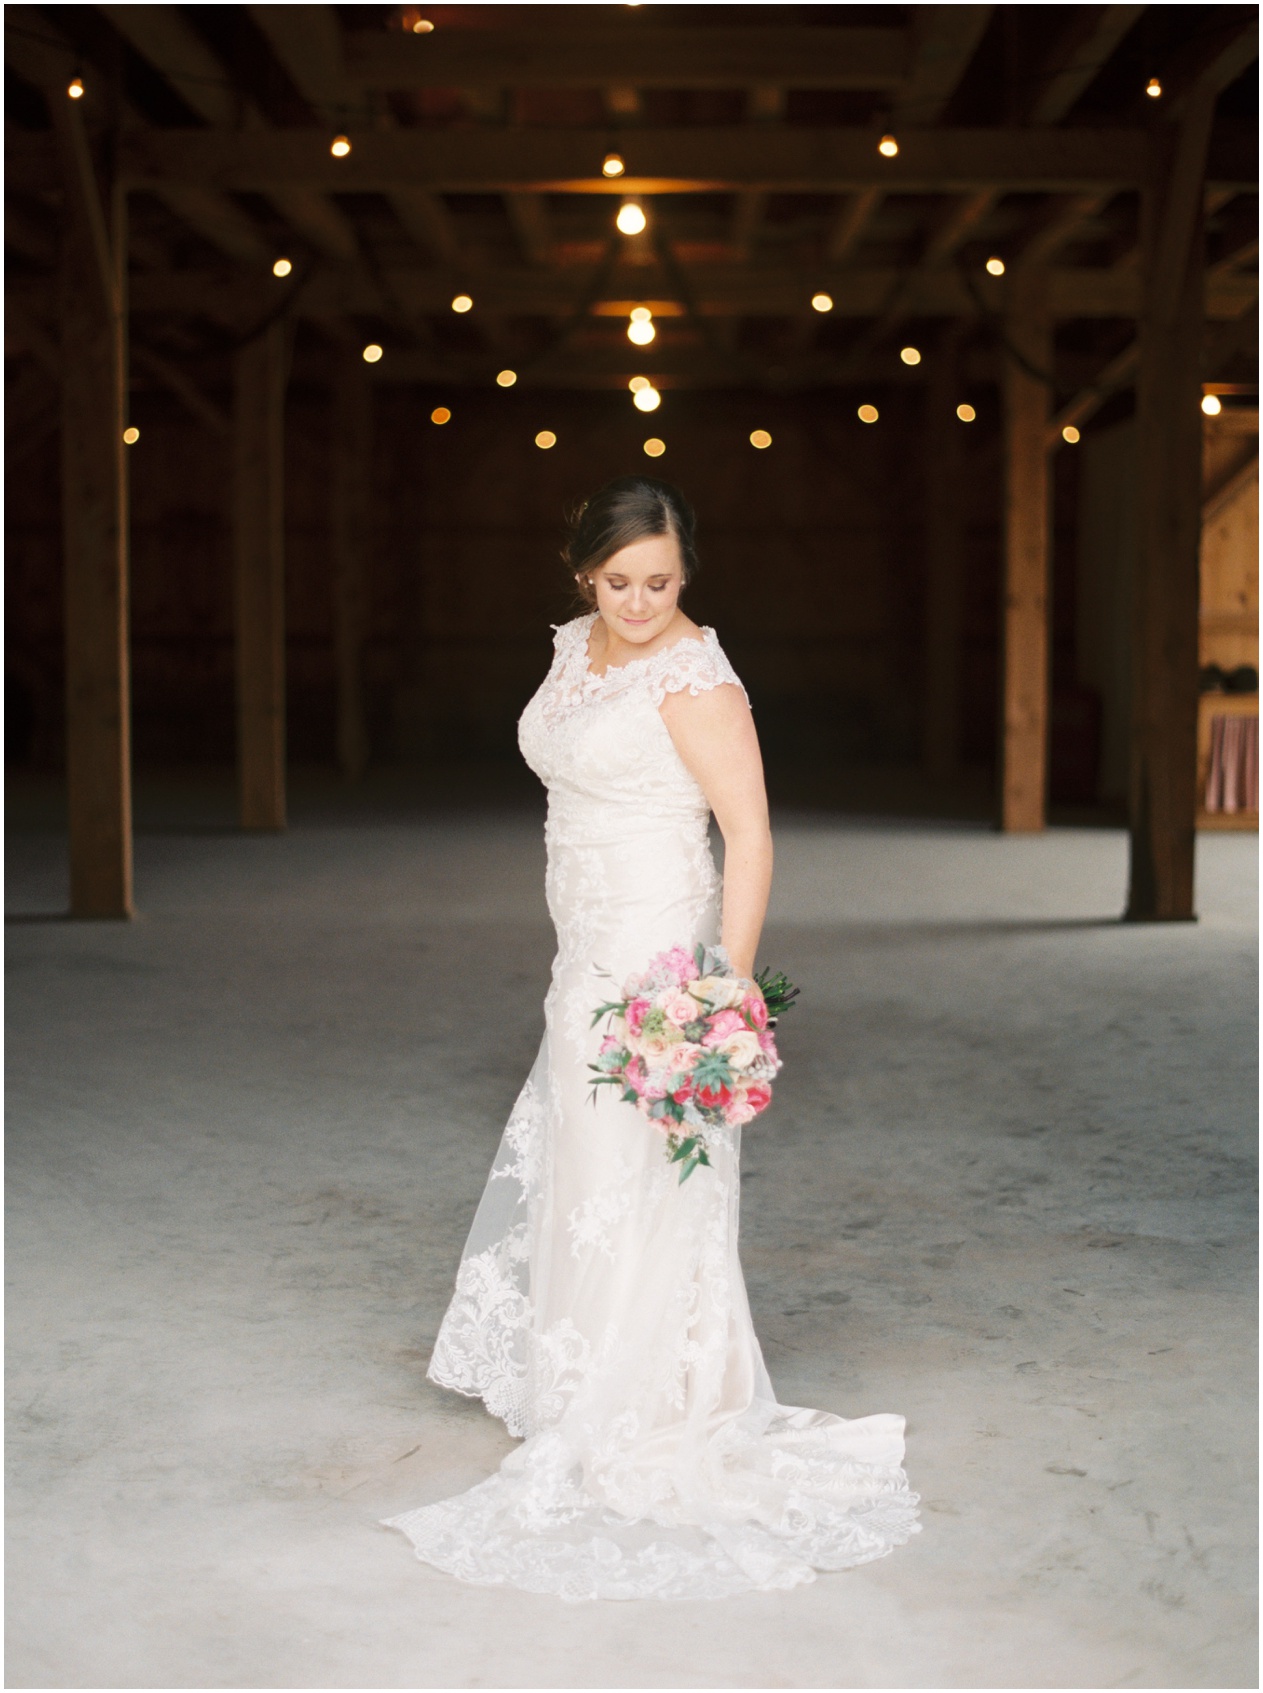 Sarah Best Photography - Claire's Bridals - The Amish Barn at Edge-1_STP.jpg